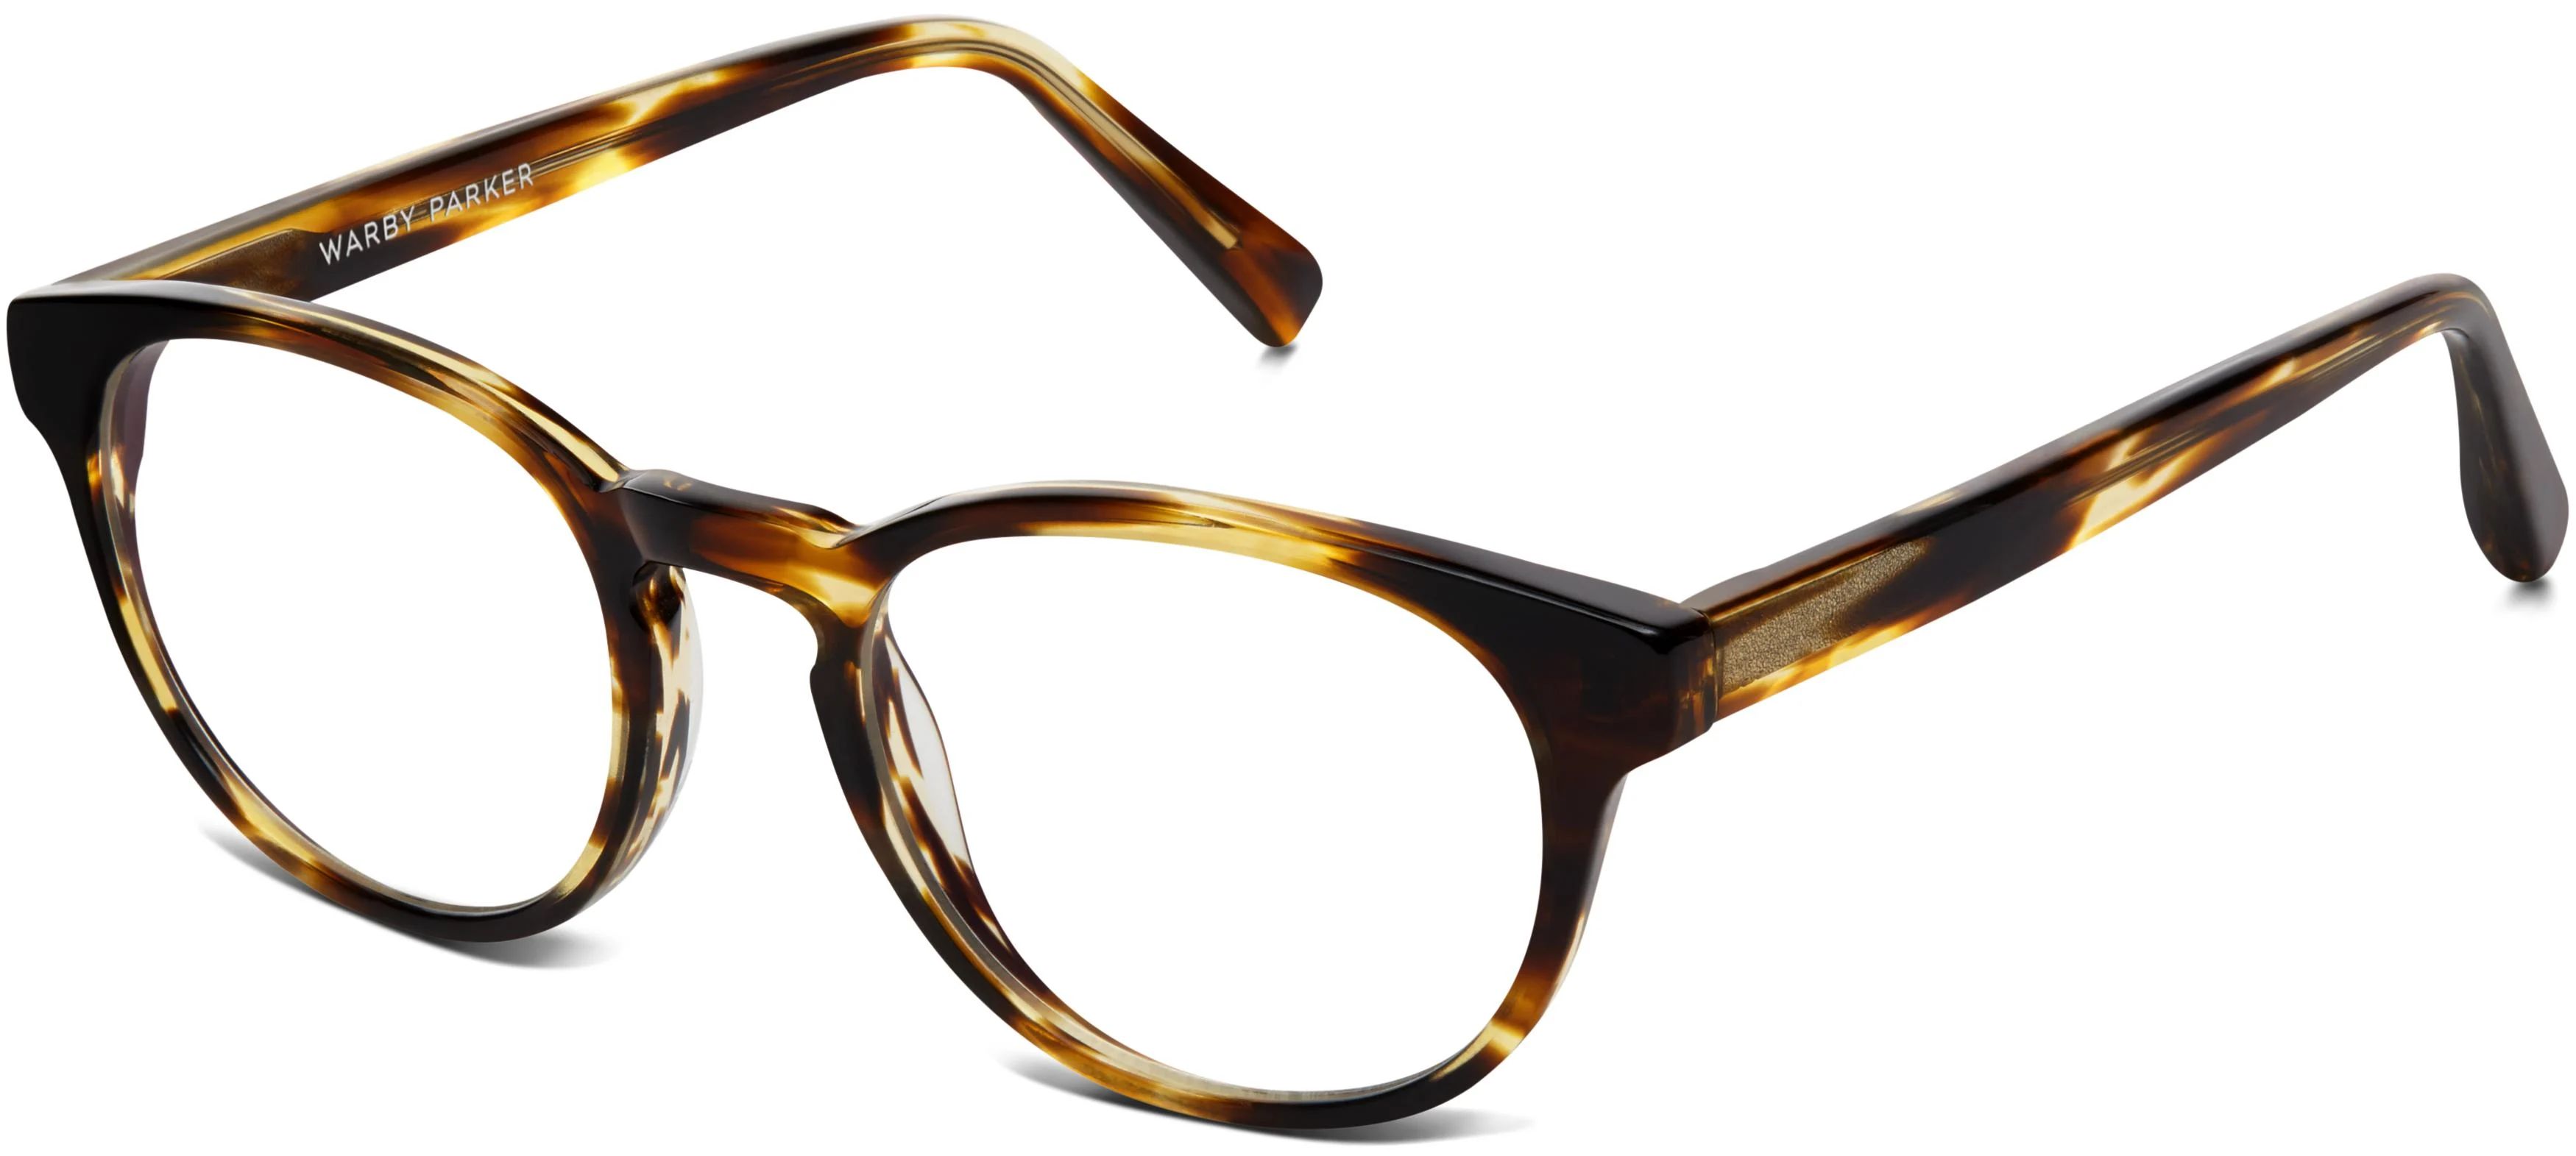 Rustin Eyeglasses in Root Beer with Brushed Ink | Warby Parker | Warby Parker (US)